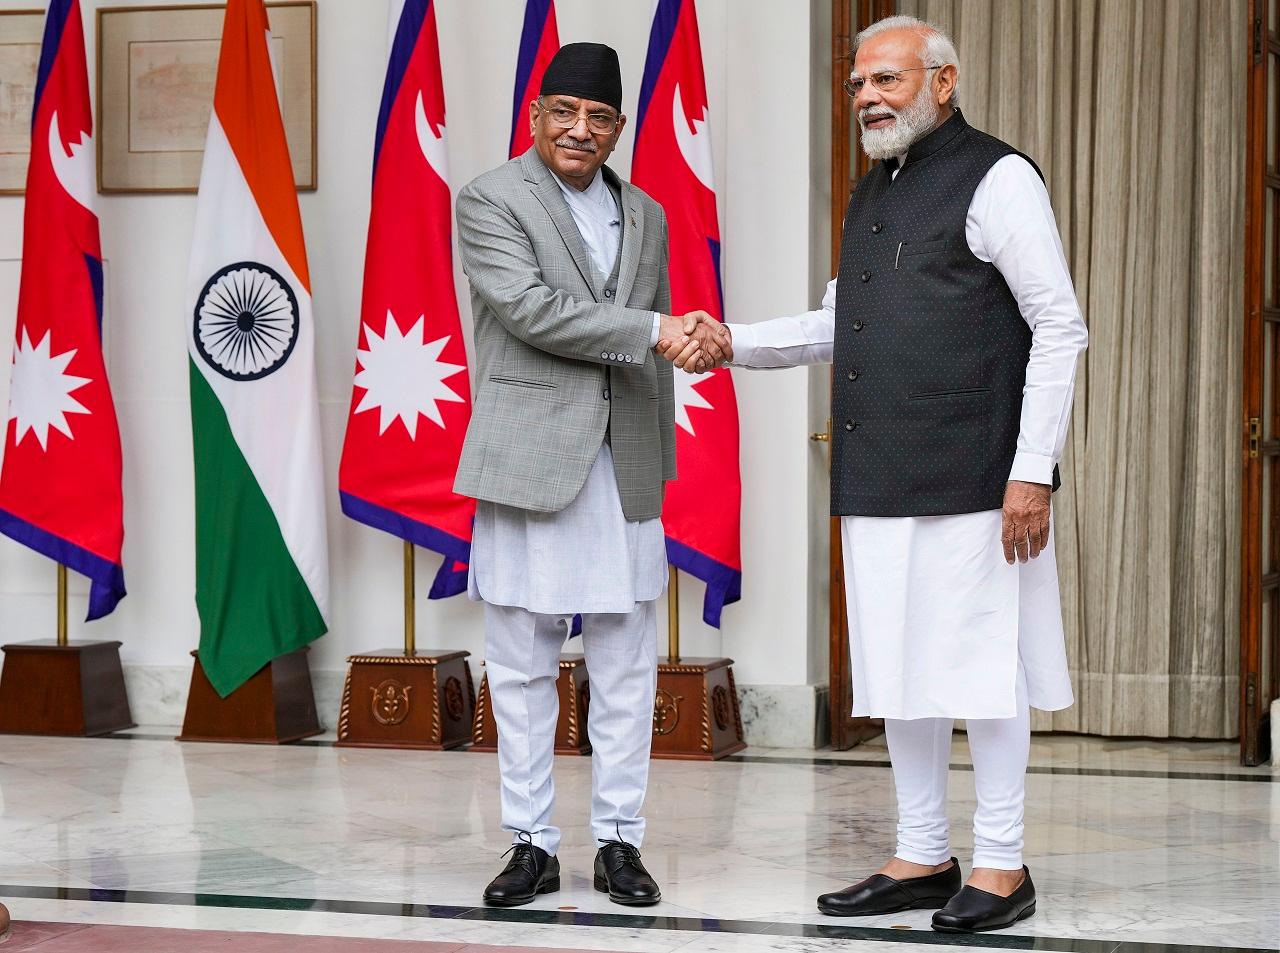 Transforming the civilisational ties between India and Nepal with deeper cooperation in areas of connectivity, economy, energy and infrastructure will be a focus area of talks between PM Modi and Prachanda, people familiar with the Nepalese leader's visit to India said